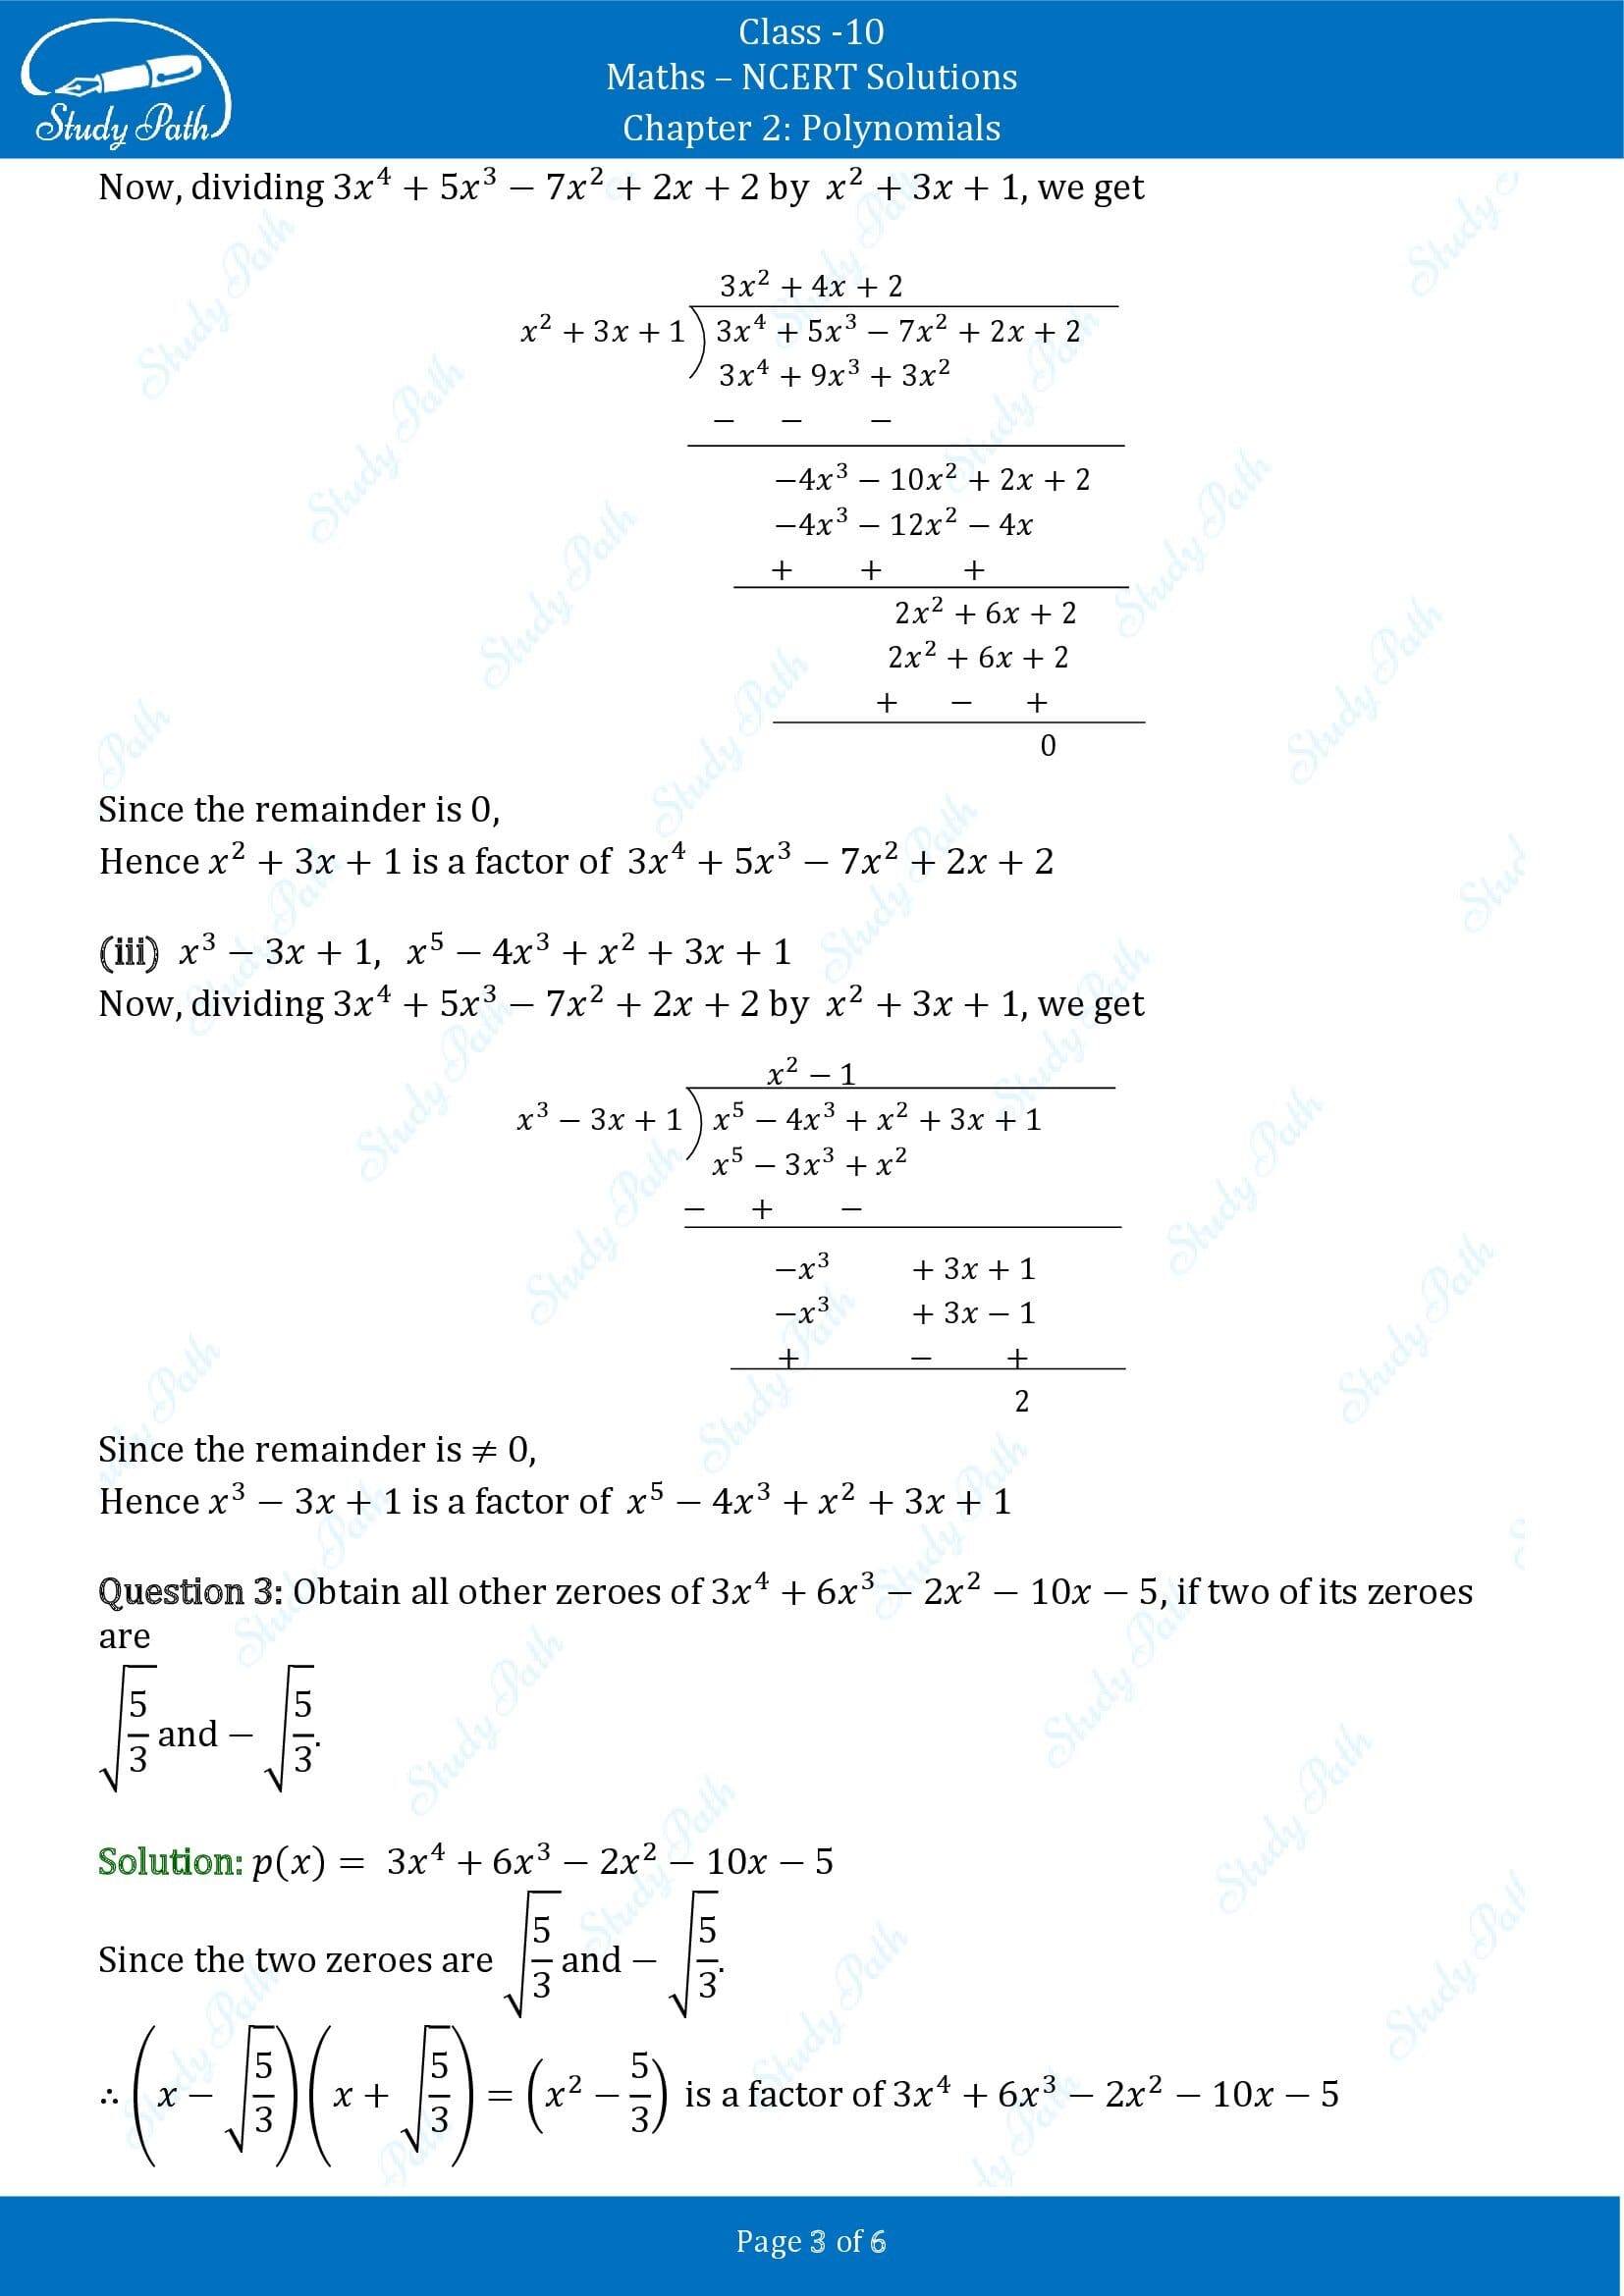 NCERT Solutions for Class 10 Maths Chapter 2 Polynomials Exercise 2.3 00003